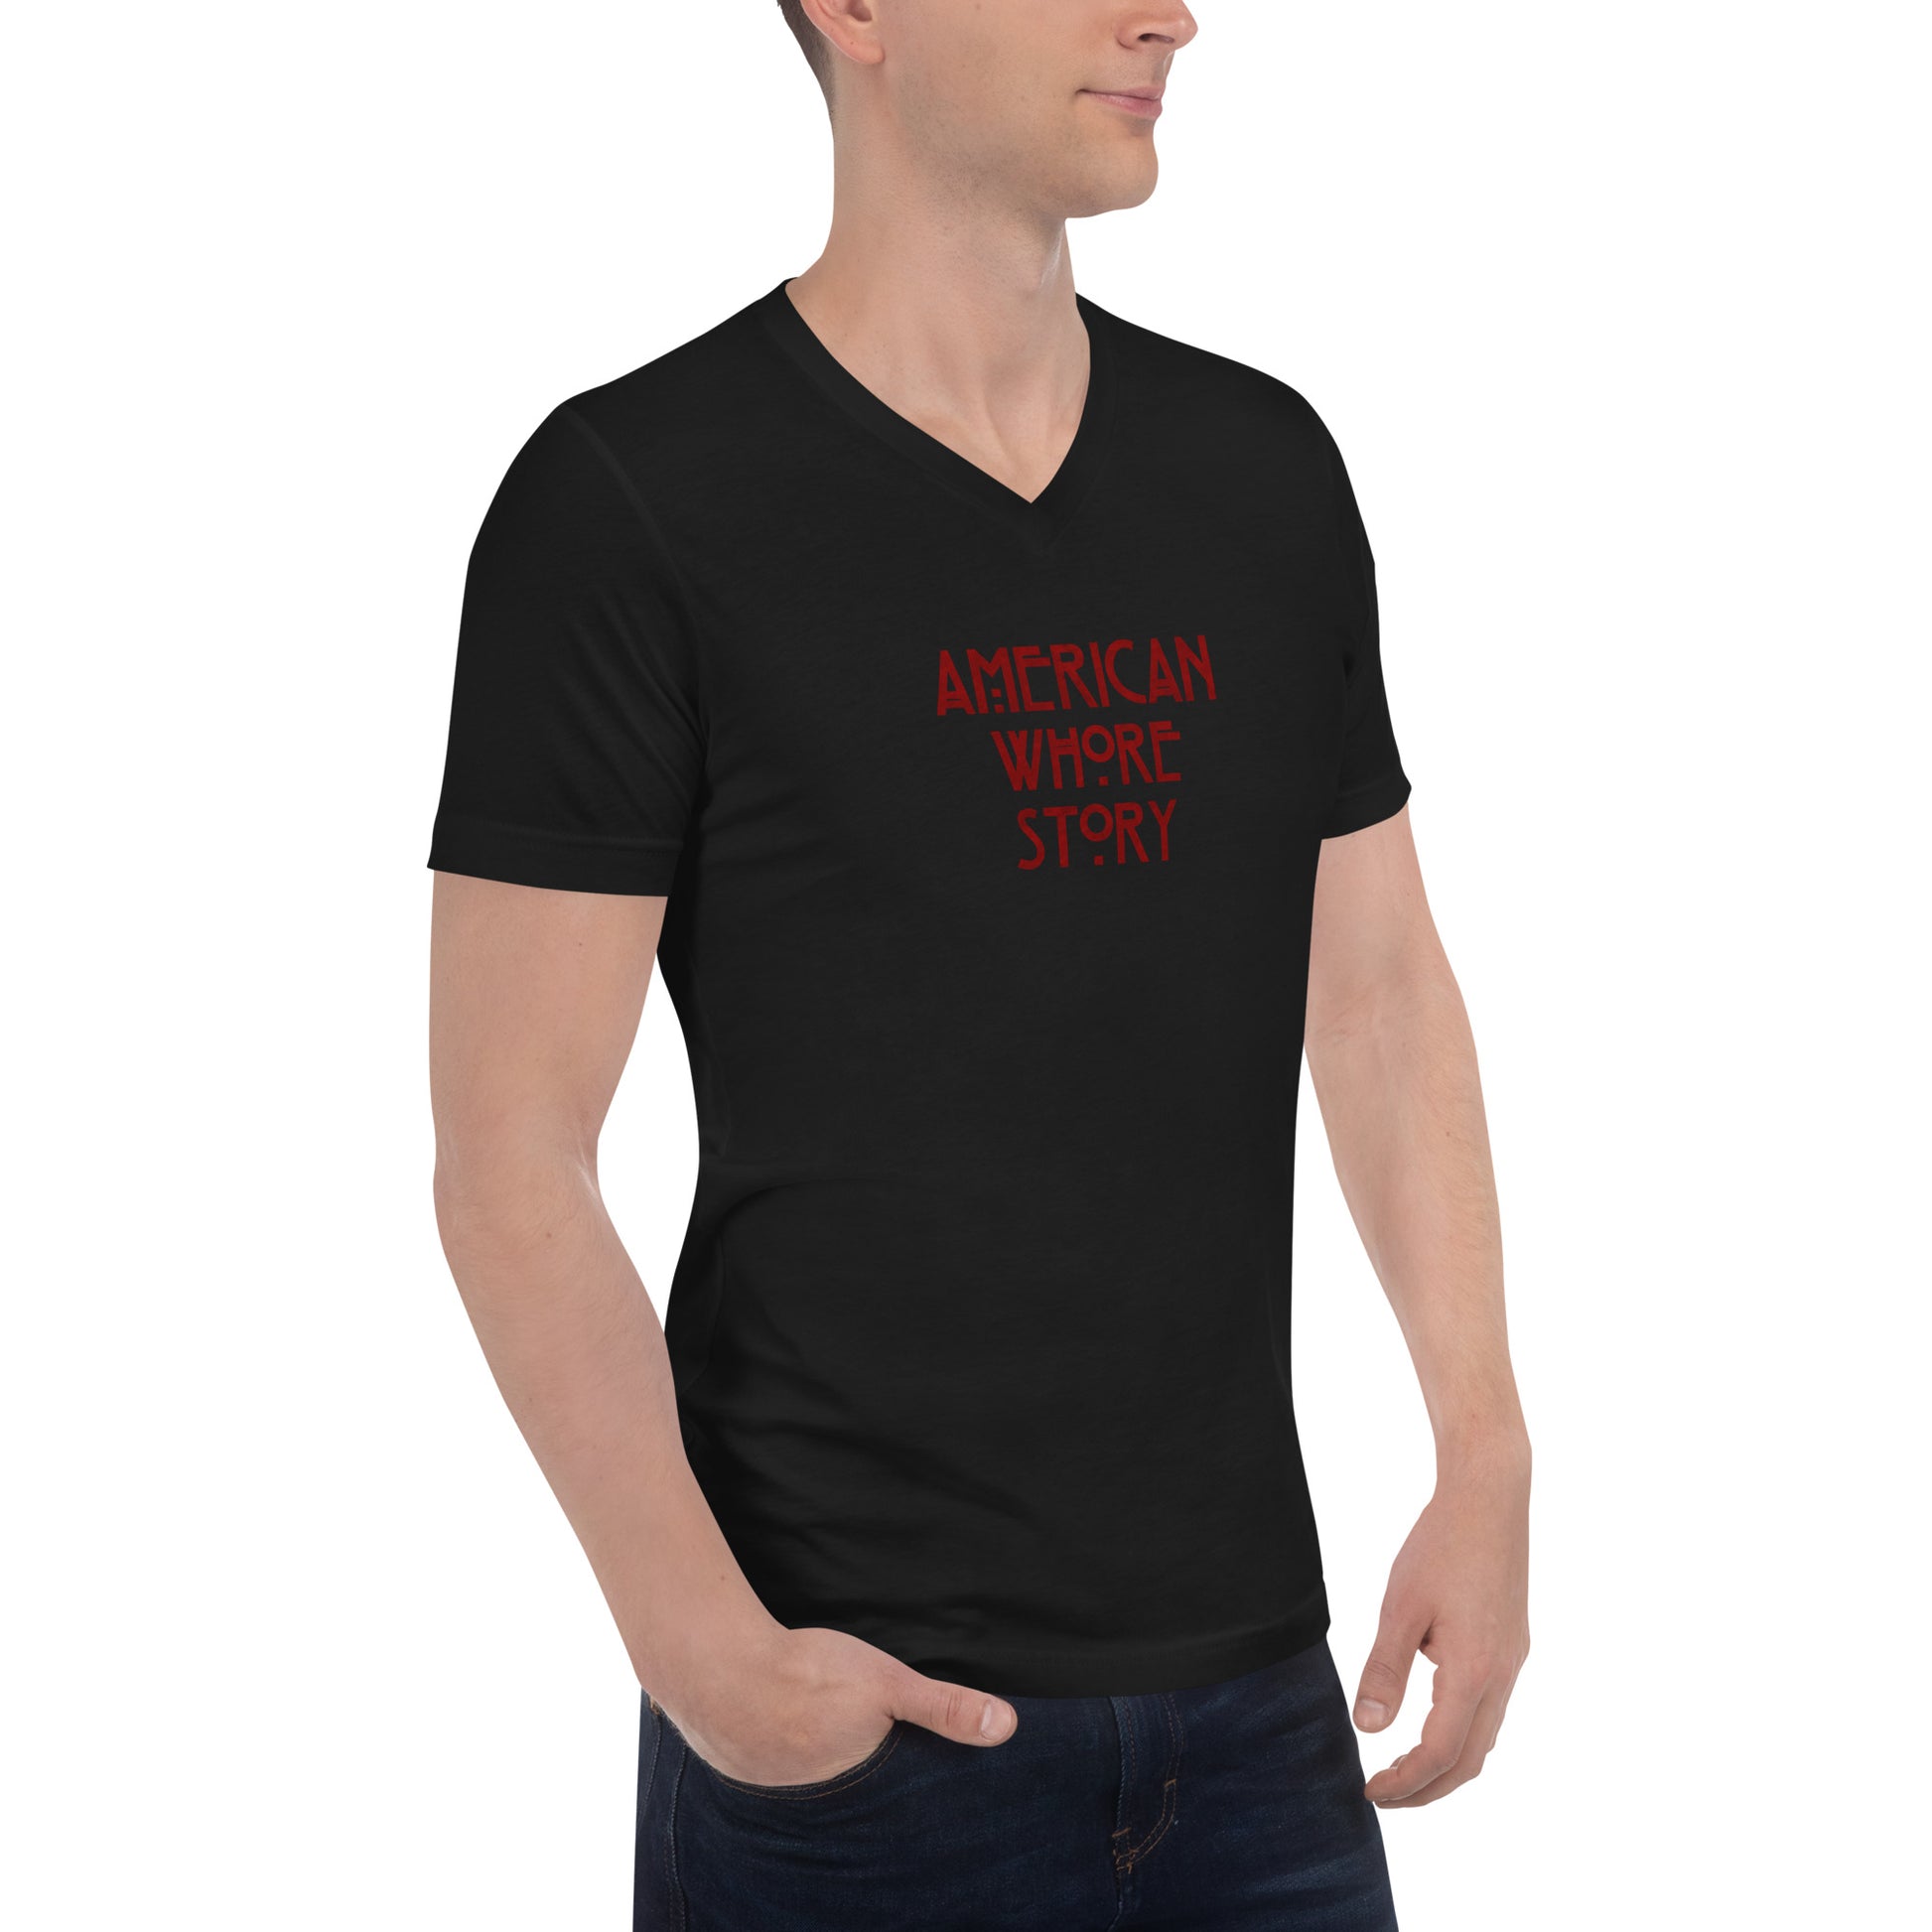 Unisex V-neck T-shirt by Moody Booty Apparel featuring 'American Whore Story' distressed red lettering. Trendy LGBTQ-themed graphic tee with irreverent humor, ideal for gay, queer, and LGBTQ individuals. Make a bold fashion statement with this inclusive and stylish design.